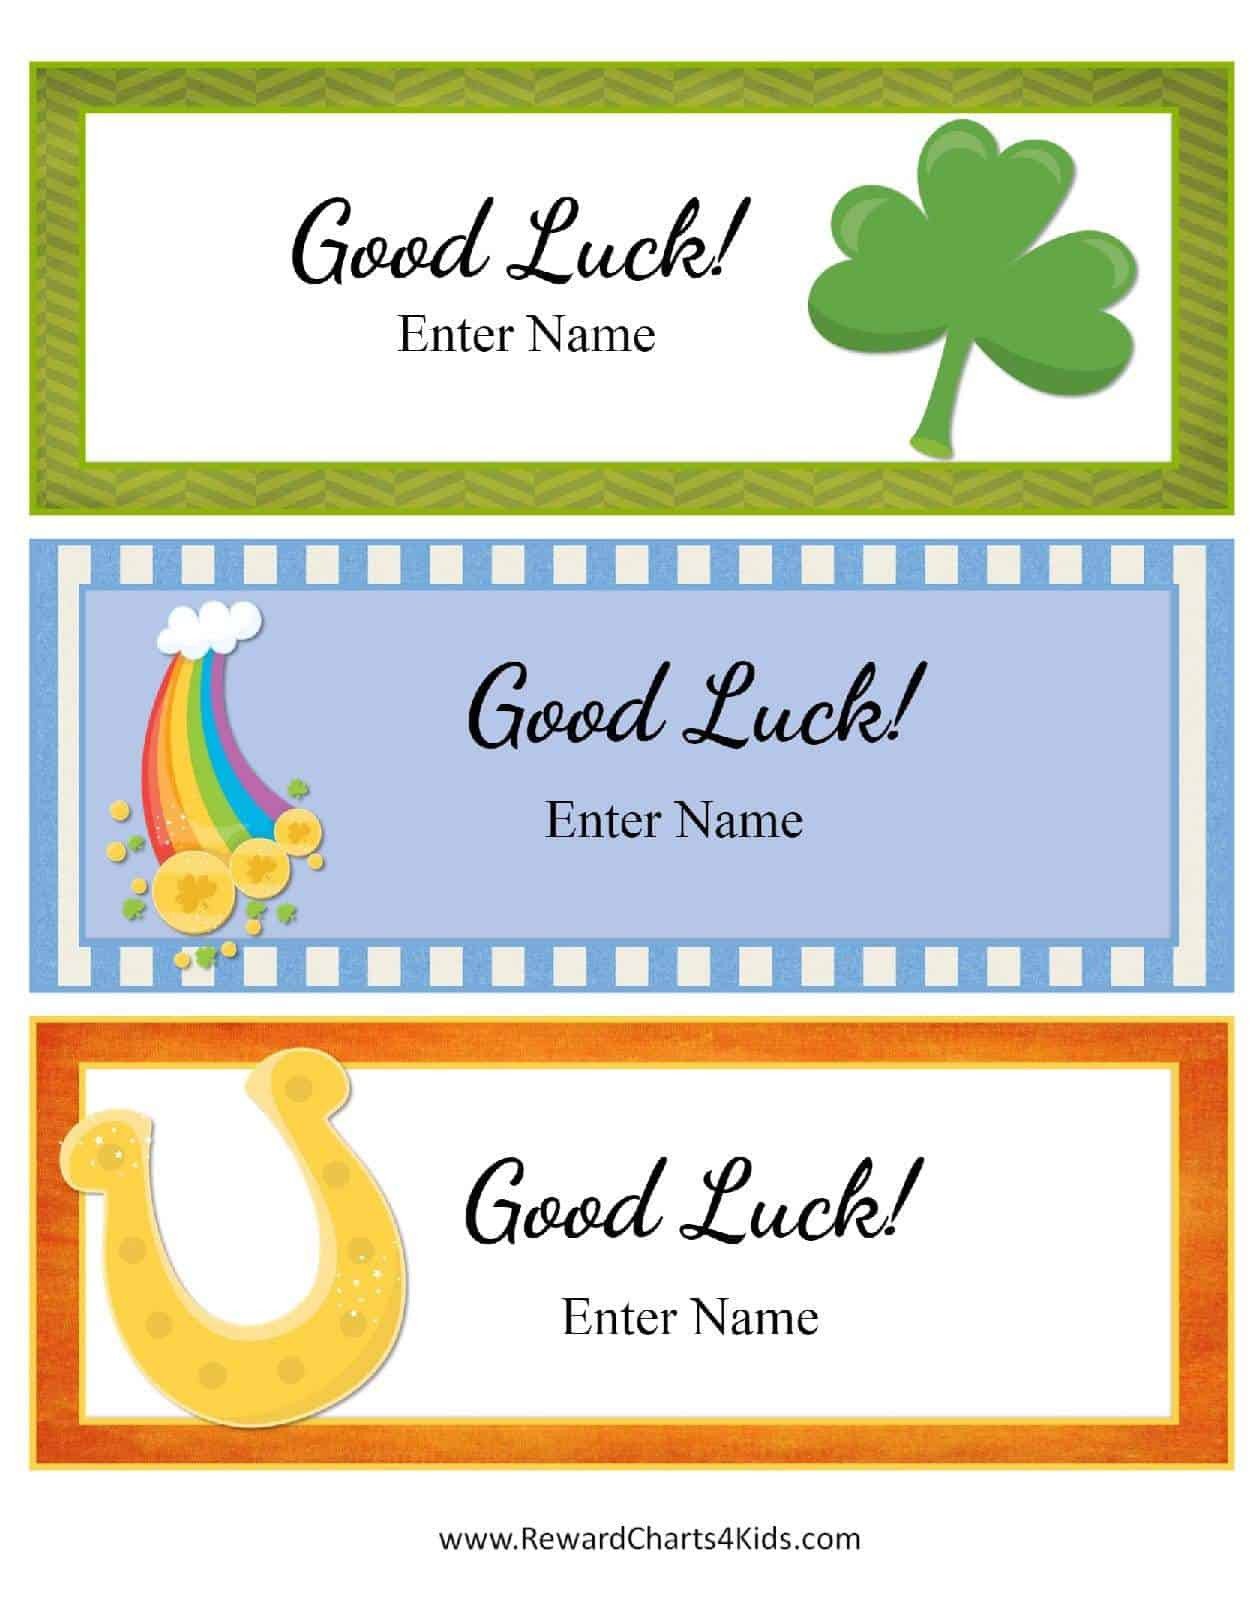 Printable Good Luck Cards Free Good Luck Cards for Kids